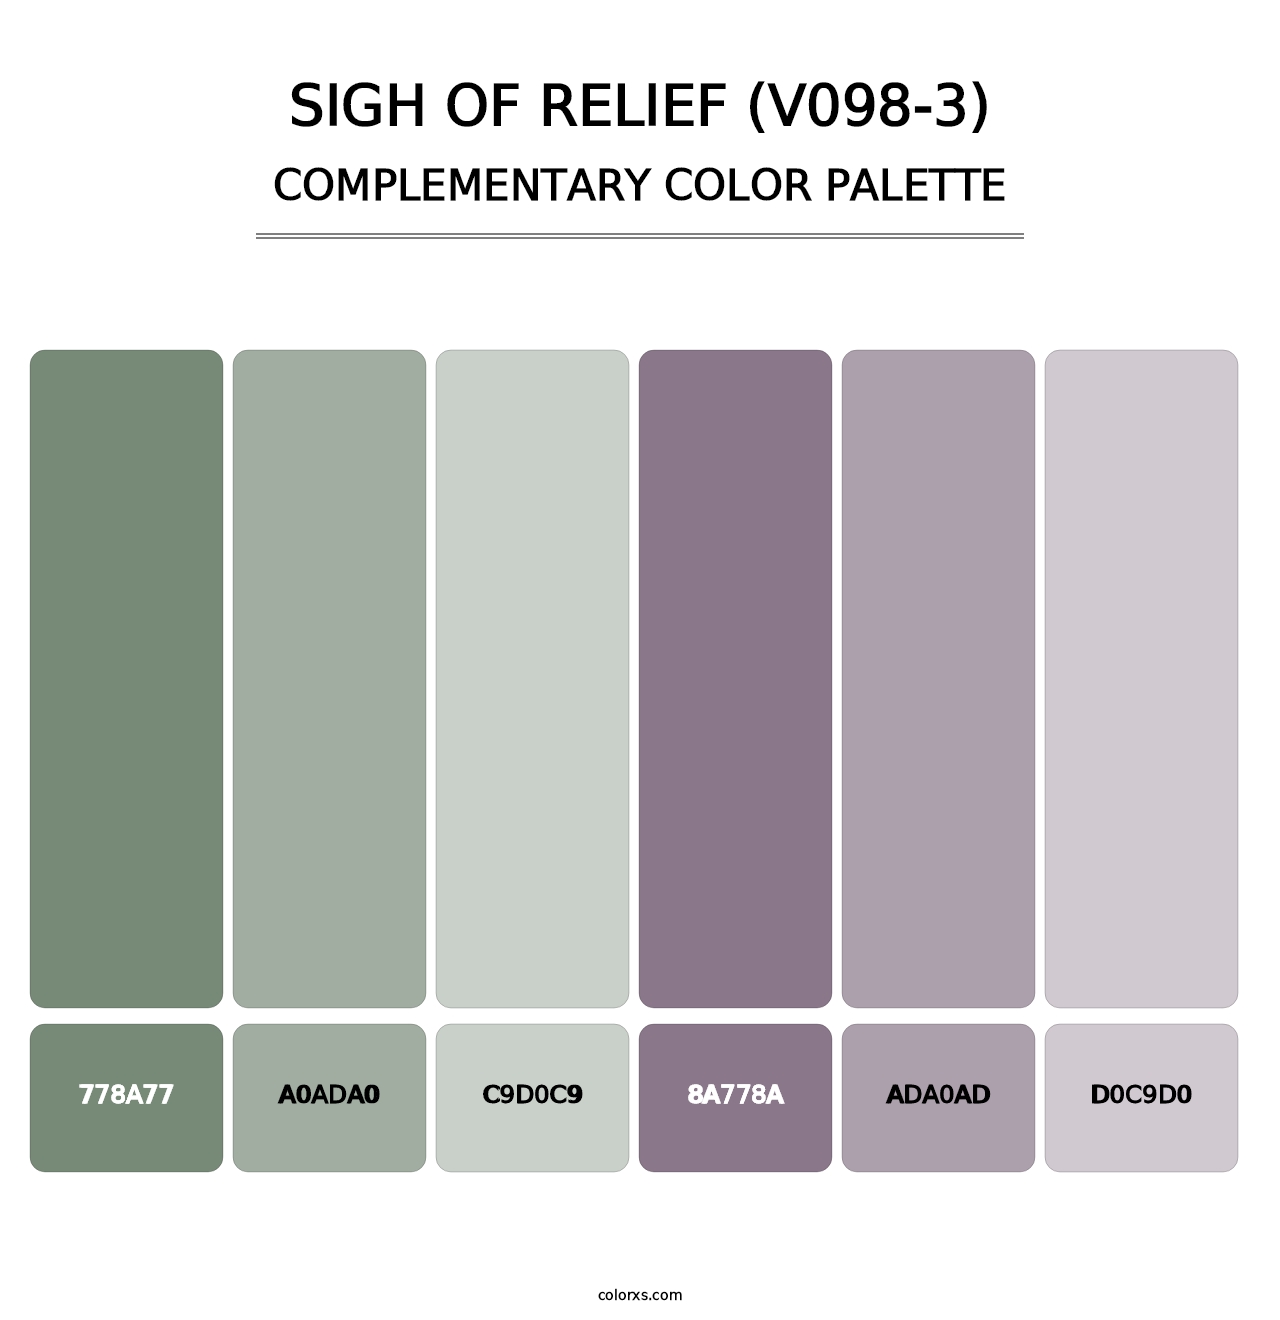 Sigh of Relief (V098-3) - Complementary Color Palette